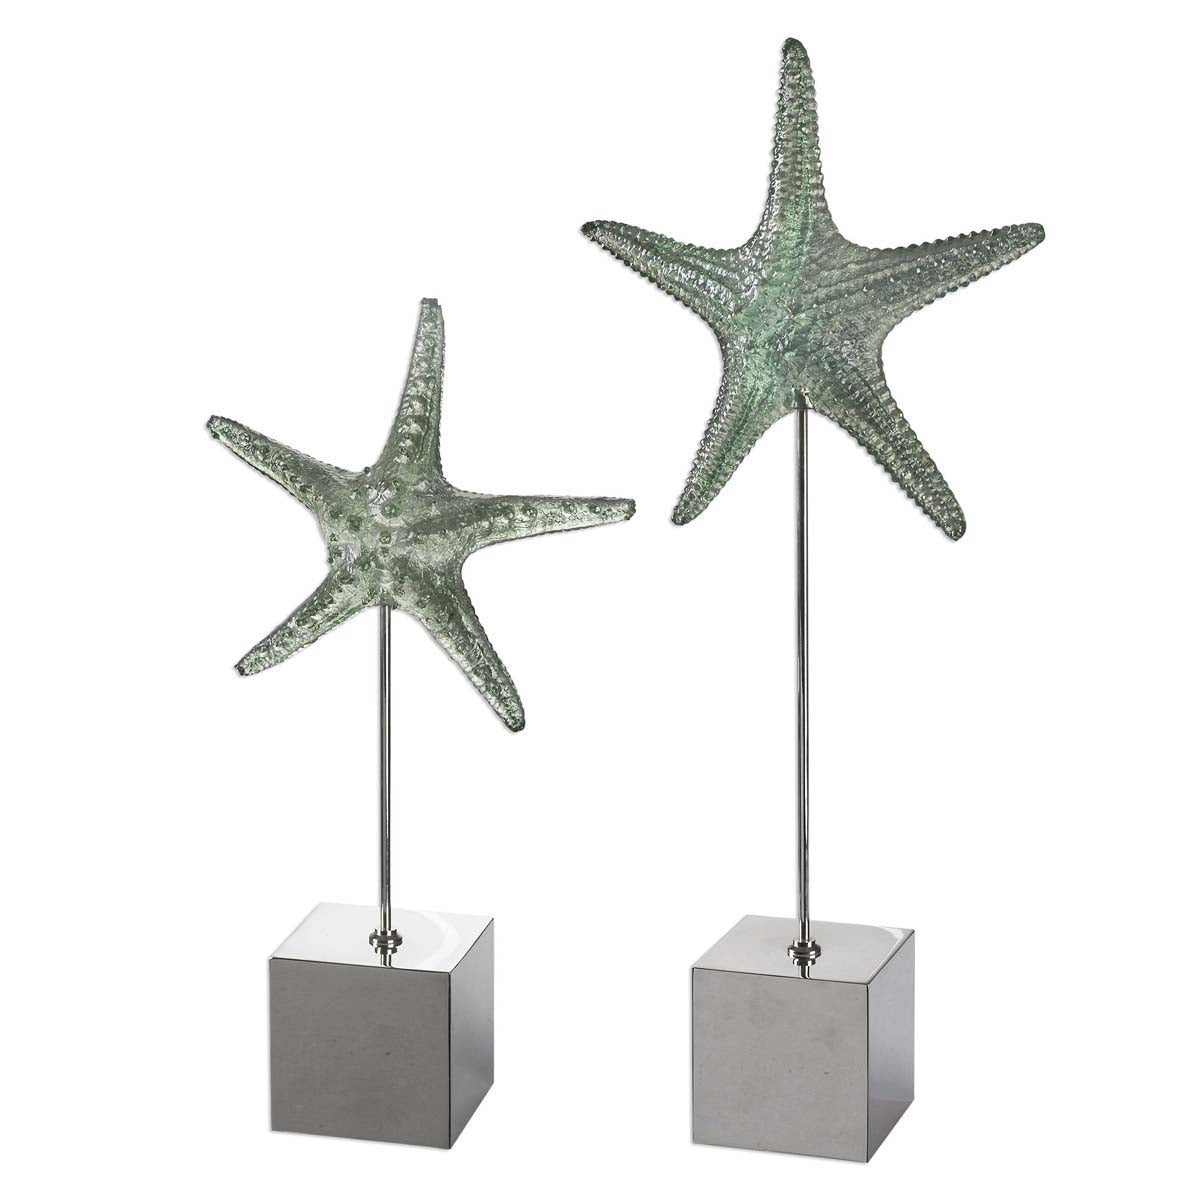 Hard Coral Sculpture S-2 by Uttermost - Maison Living